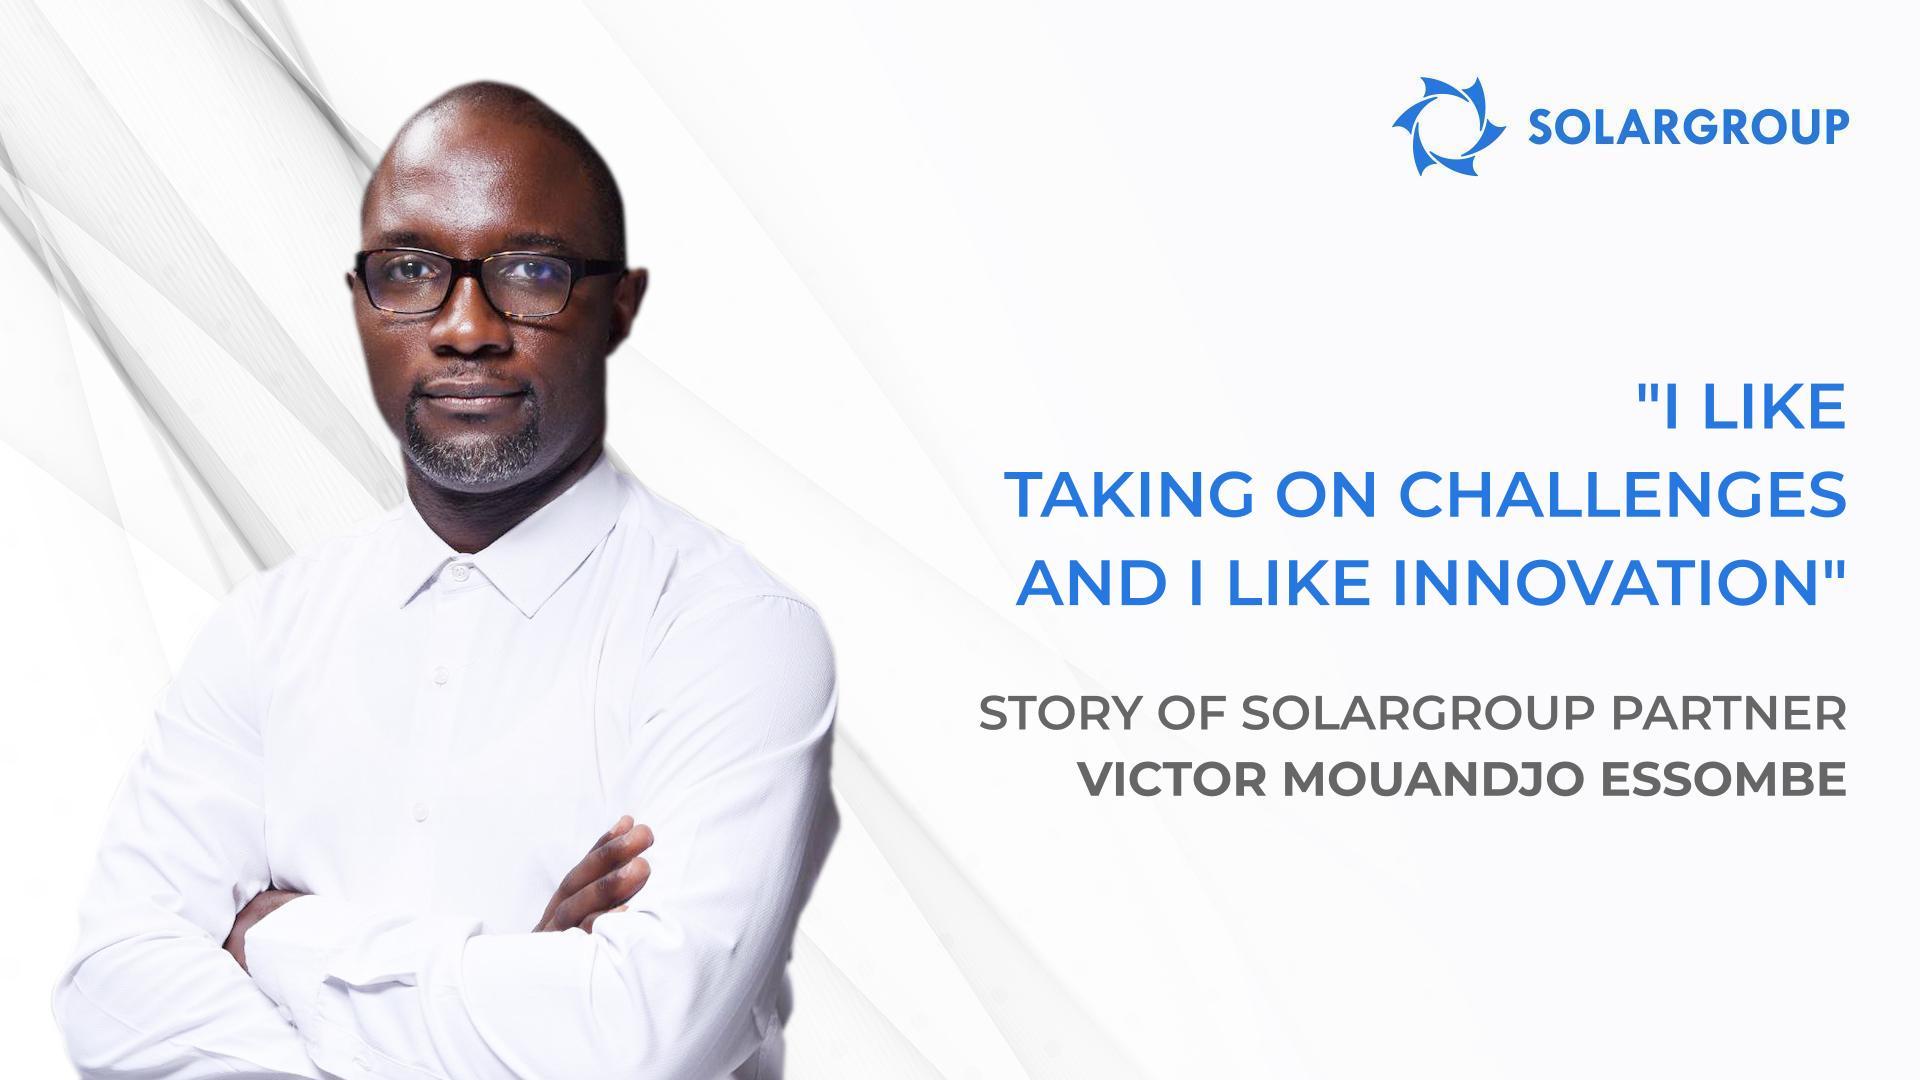 My team and I have big plans! The story of SOLARGROUP partner Victor Mouandjo Essombe